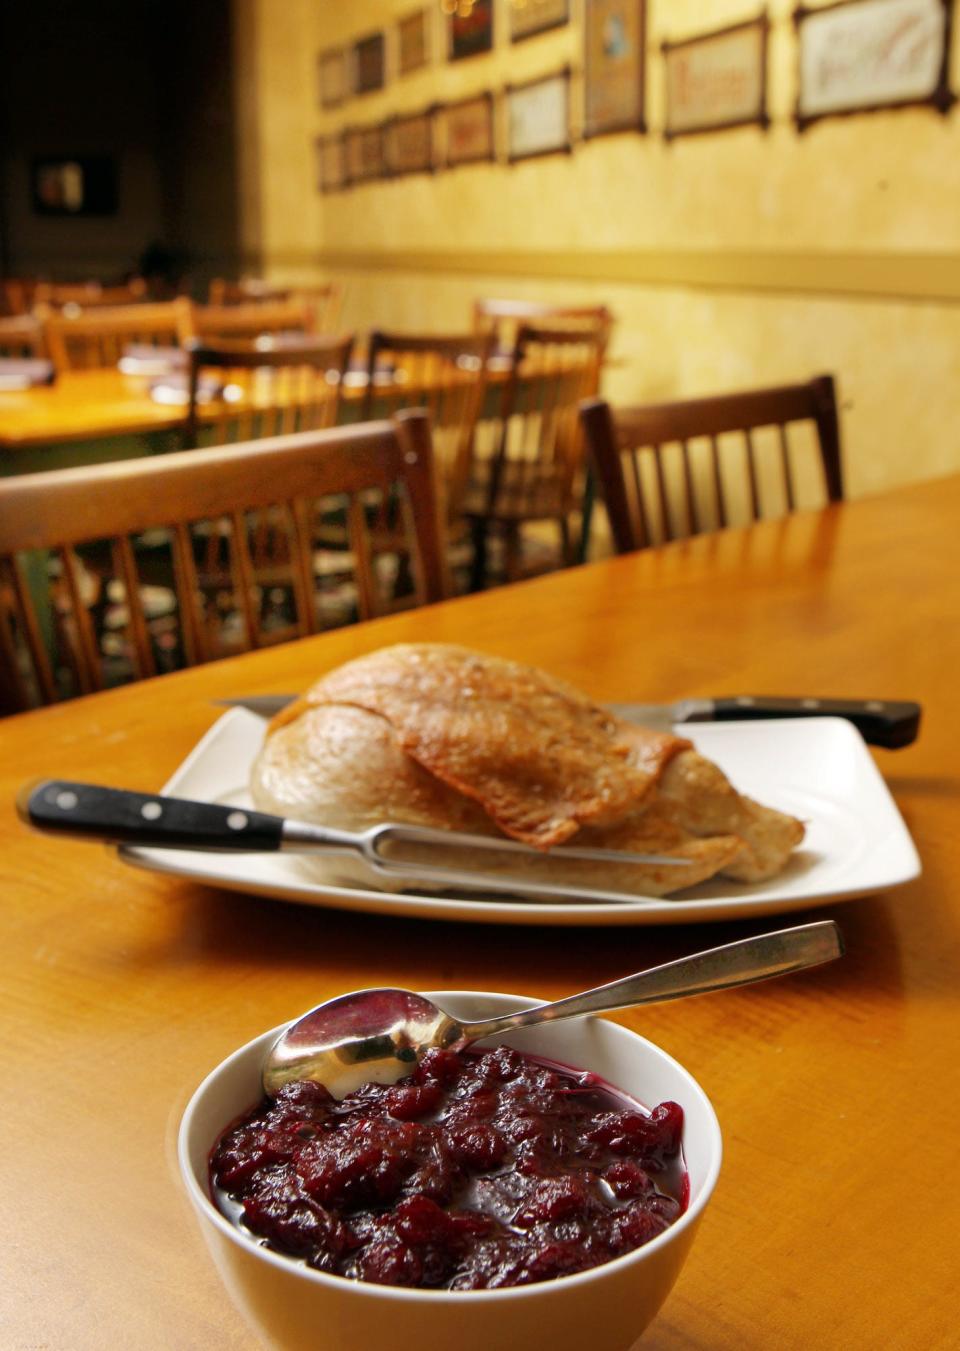 Homemade cranberry sauce and roasted turkey breast from The Golden Lamb, Lebanon.